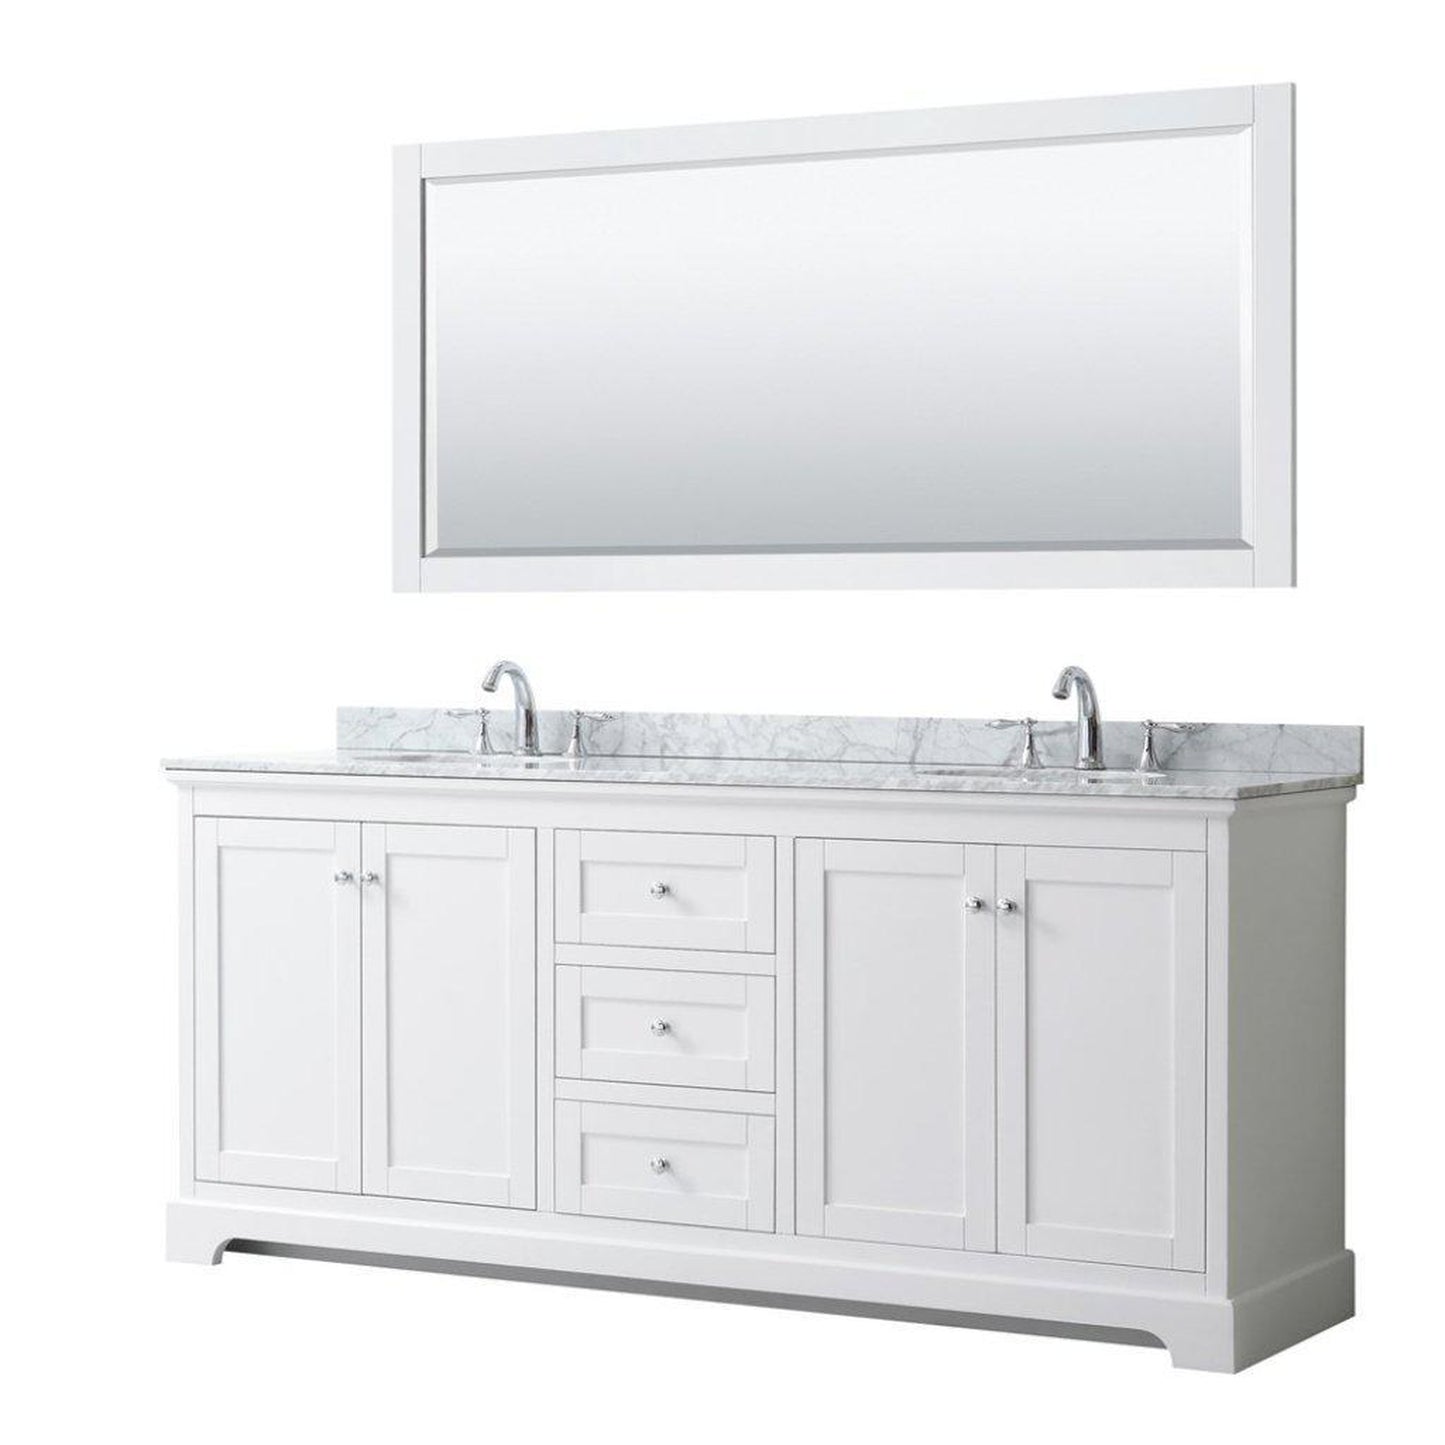 Wyndham Collection Avery 80" White Double Bathroom Vanity Set, White Carrara Marble Countertop With 3-Hole Faucet, 8" Oval Sink, 70" Mirror, Polished Chrome Trims